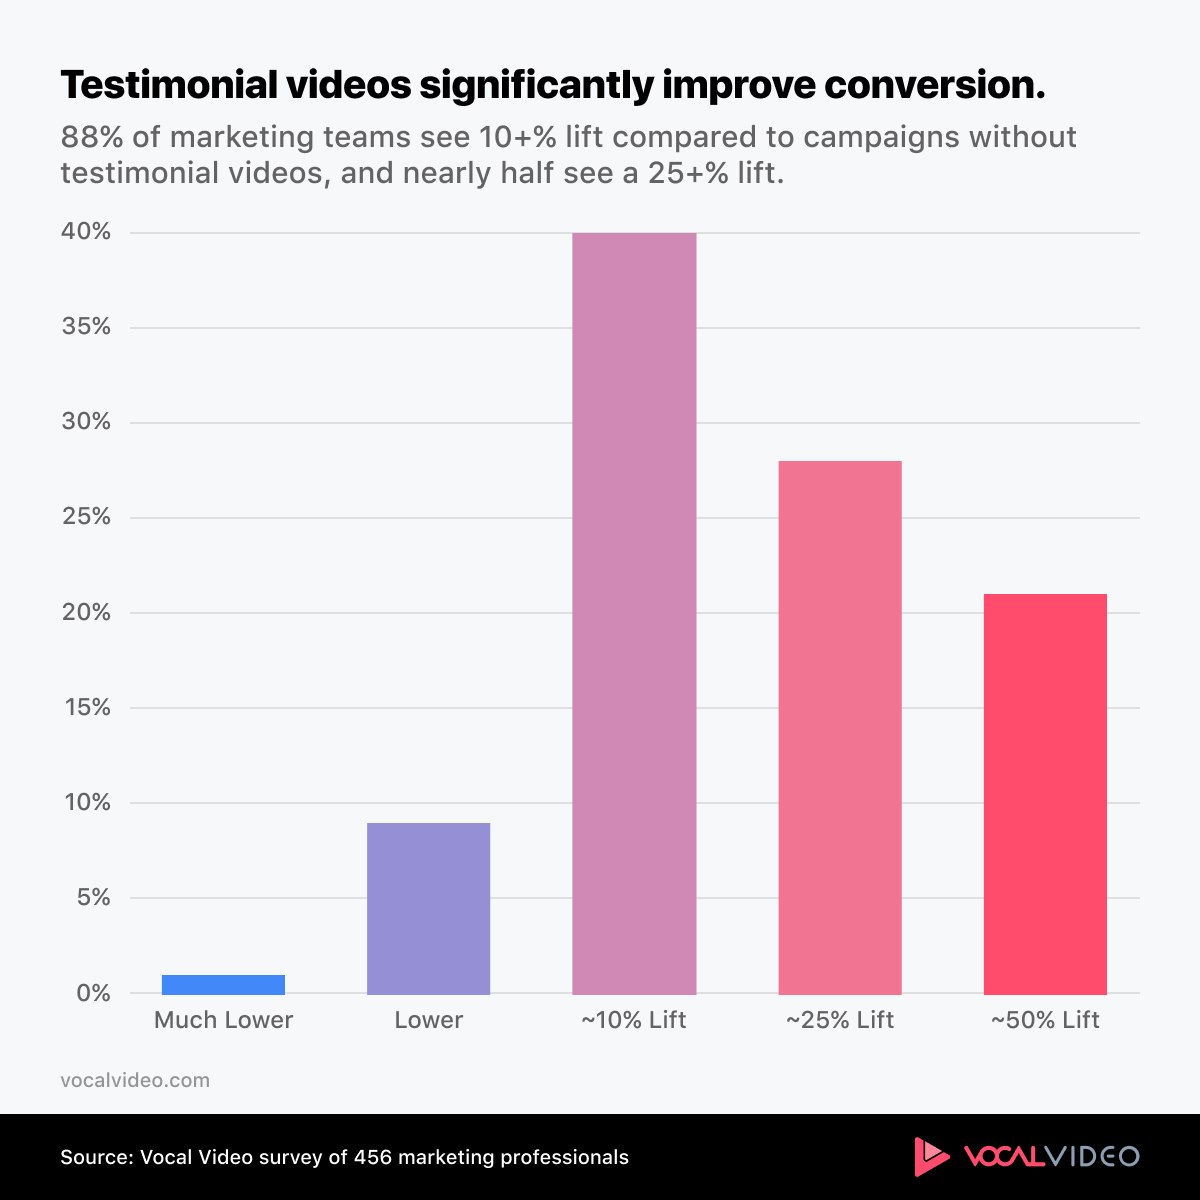 Graph showing that testimonial videos significantly improve conversion.